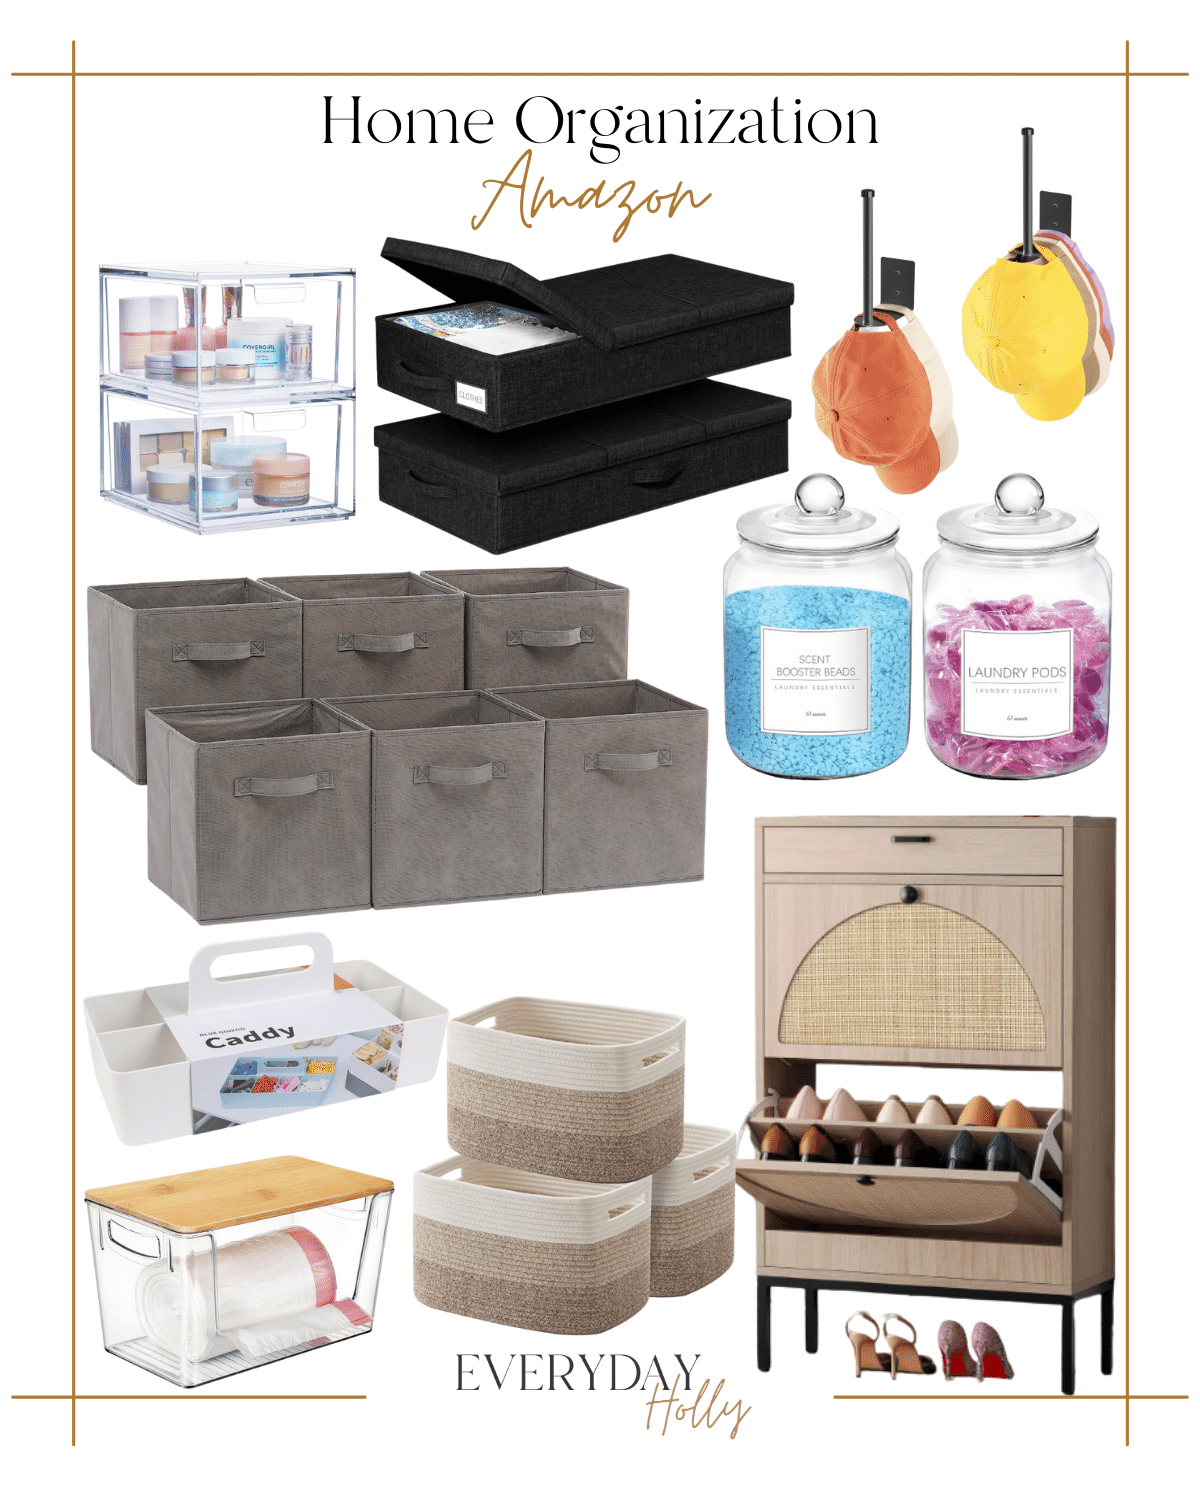 new year home refresh with these organizational must haves | new year, home refresh, home organization, organization, storage, under the bed storage, fabric cubes, stackable drawers, hat storage, multipurpose basket, caddy